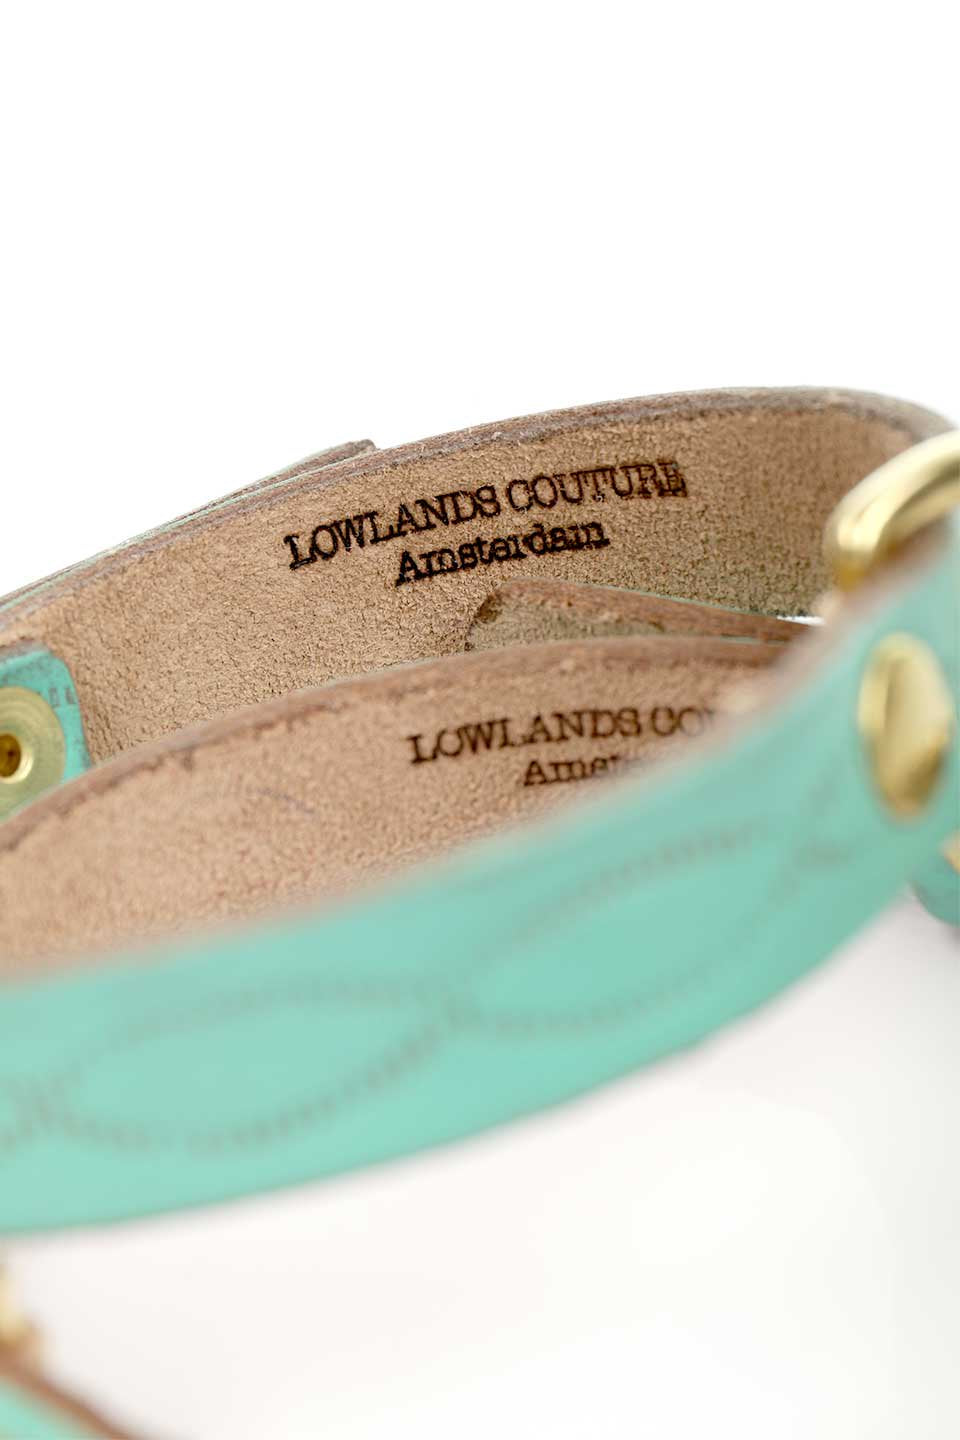 Aqua Green アクアグリーン・ドッグカラー / by Lowlands COUTURE